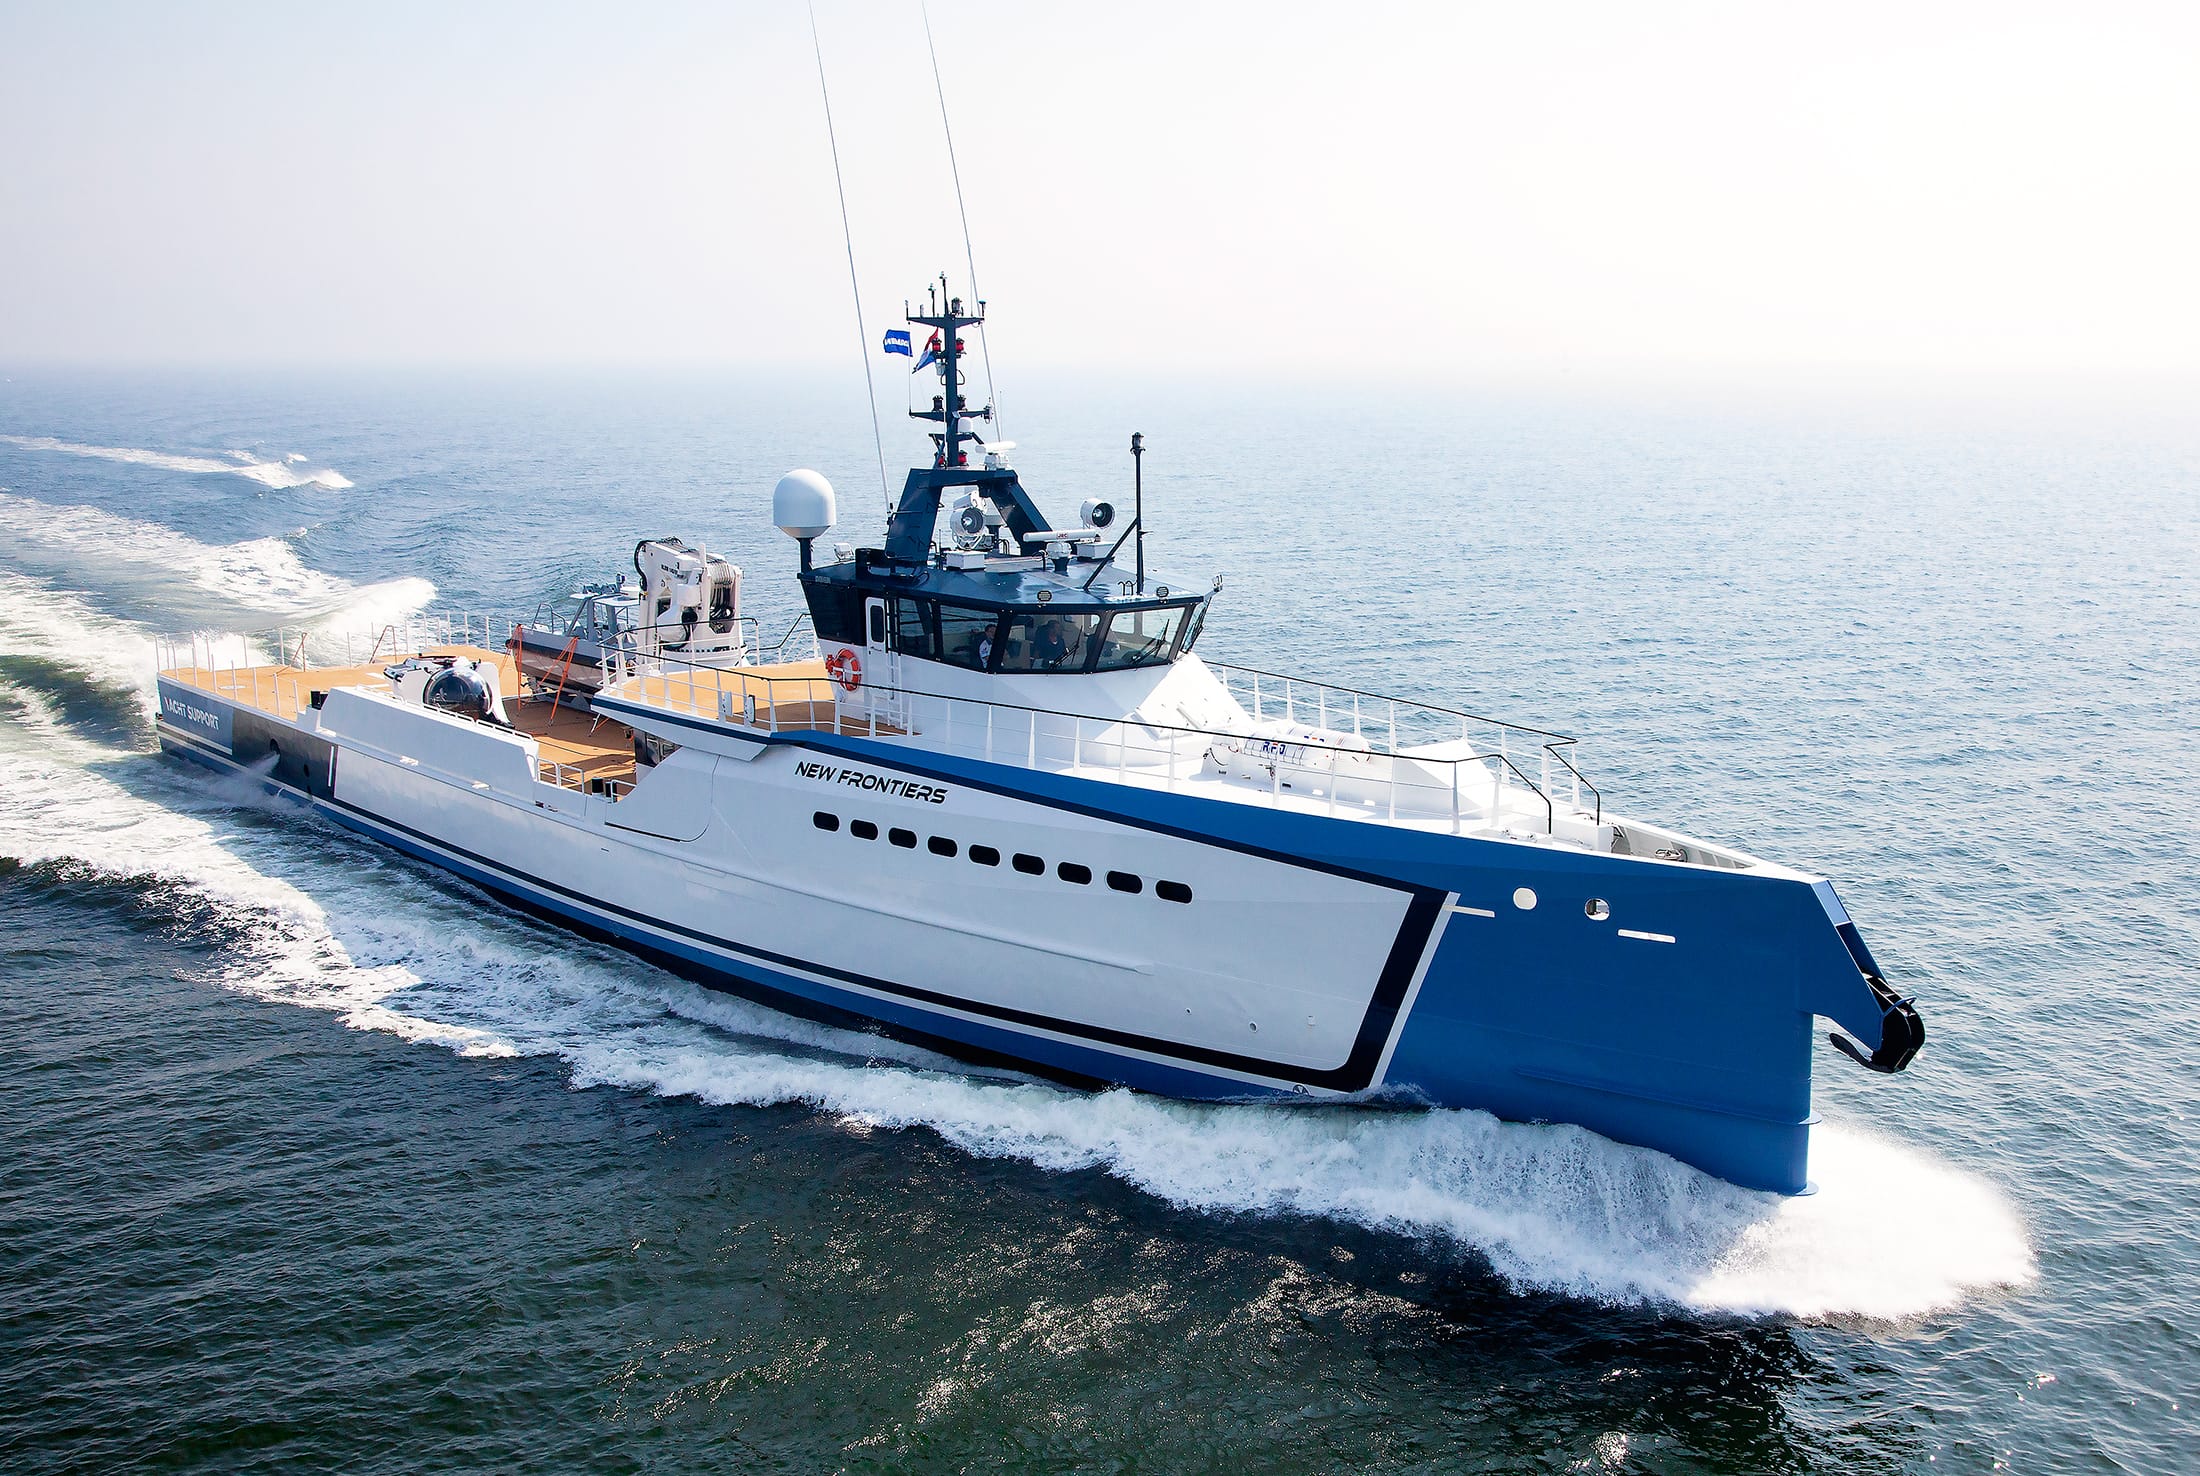 Shadow yacht – support vessel – Rob and Richard Sands